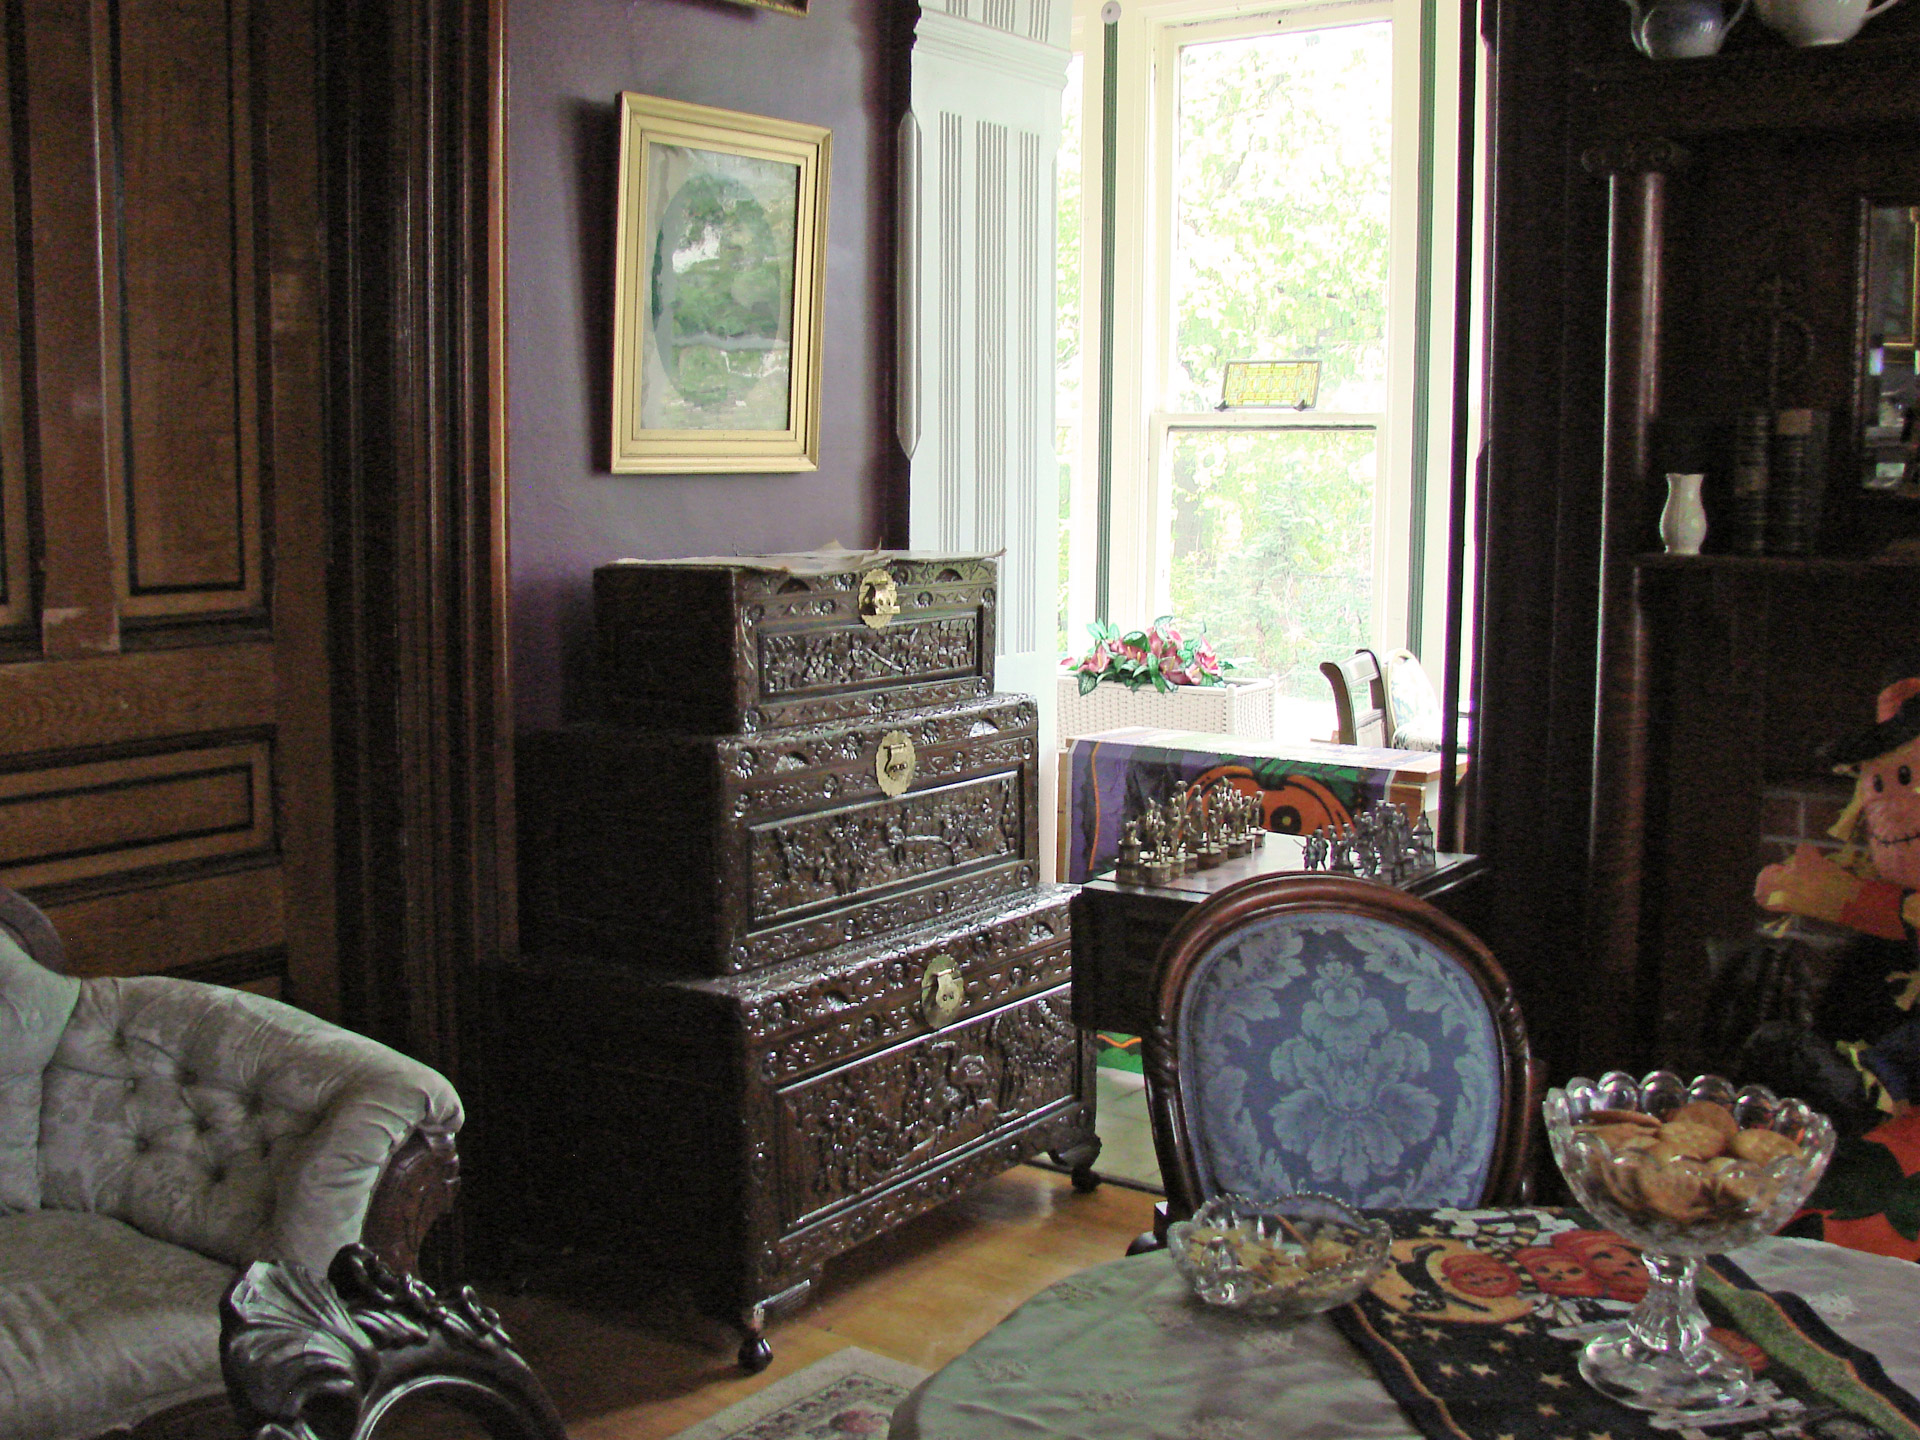 The Hiram B. Scutt Mansion, also known as Barb Villa, is a historic residence in Joliet, Illinois. Pictured is a section of a sitting room. The house is rumored to be haunted.